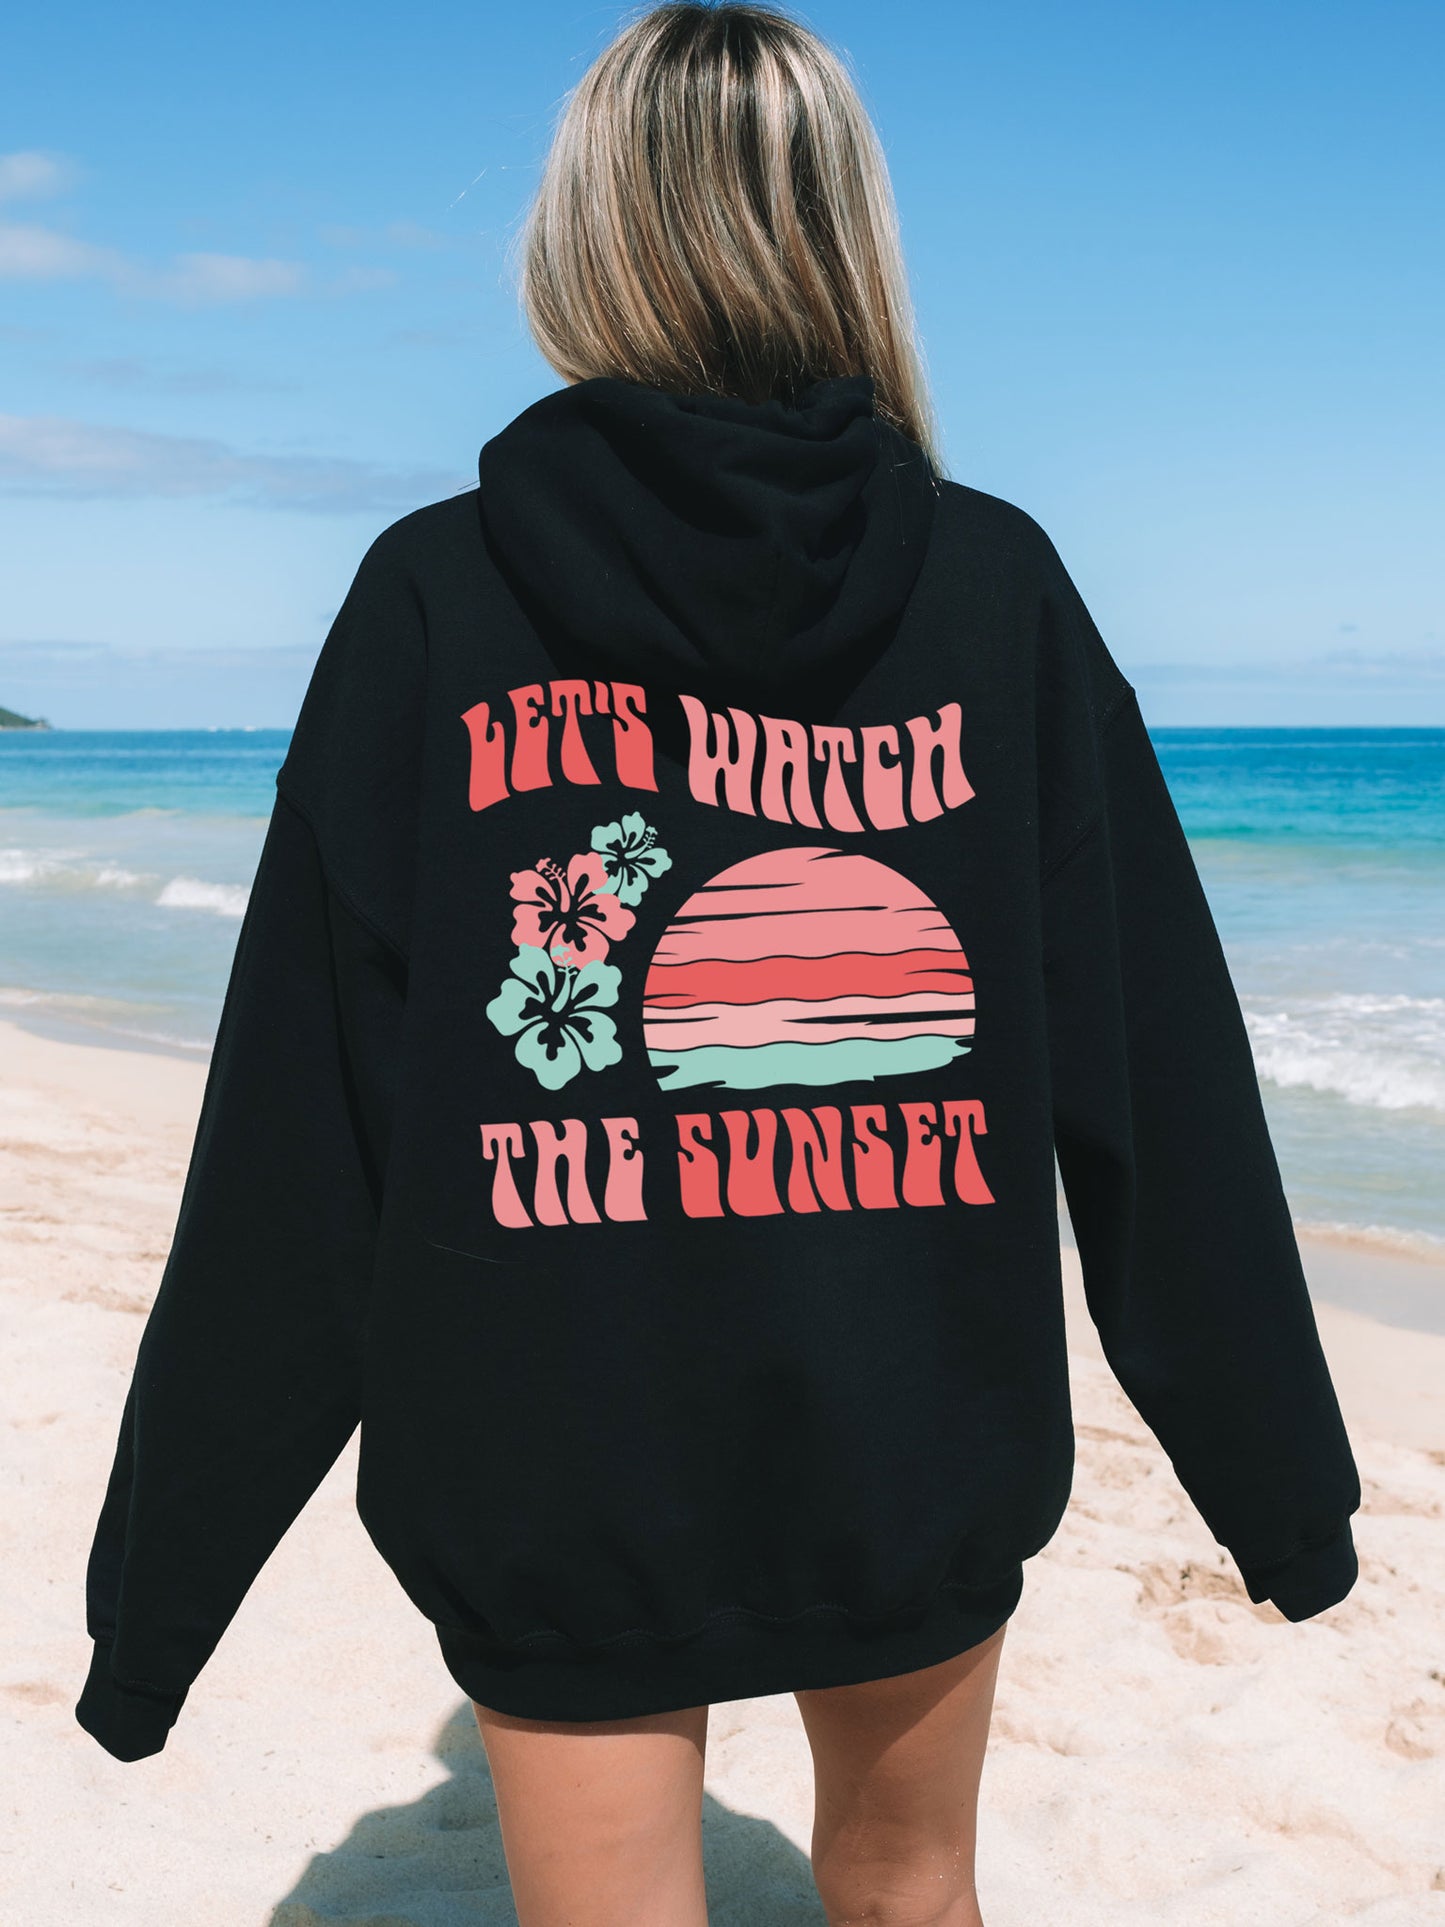 Let's Watch The Sunset Hoodie